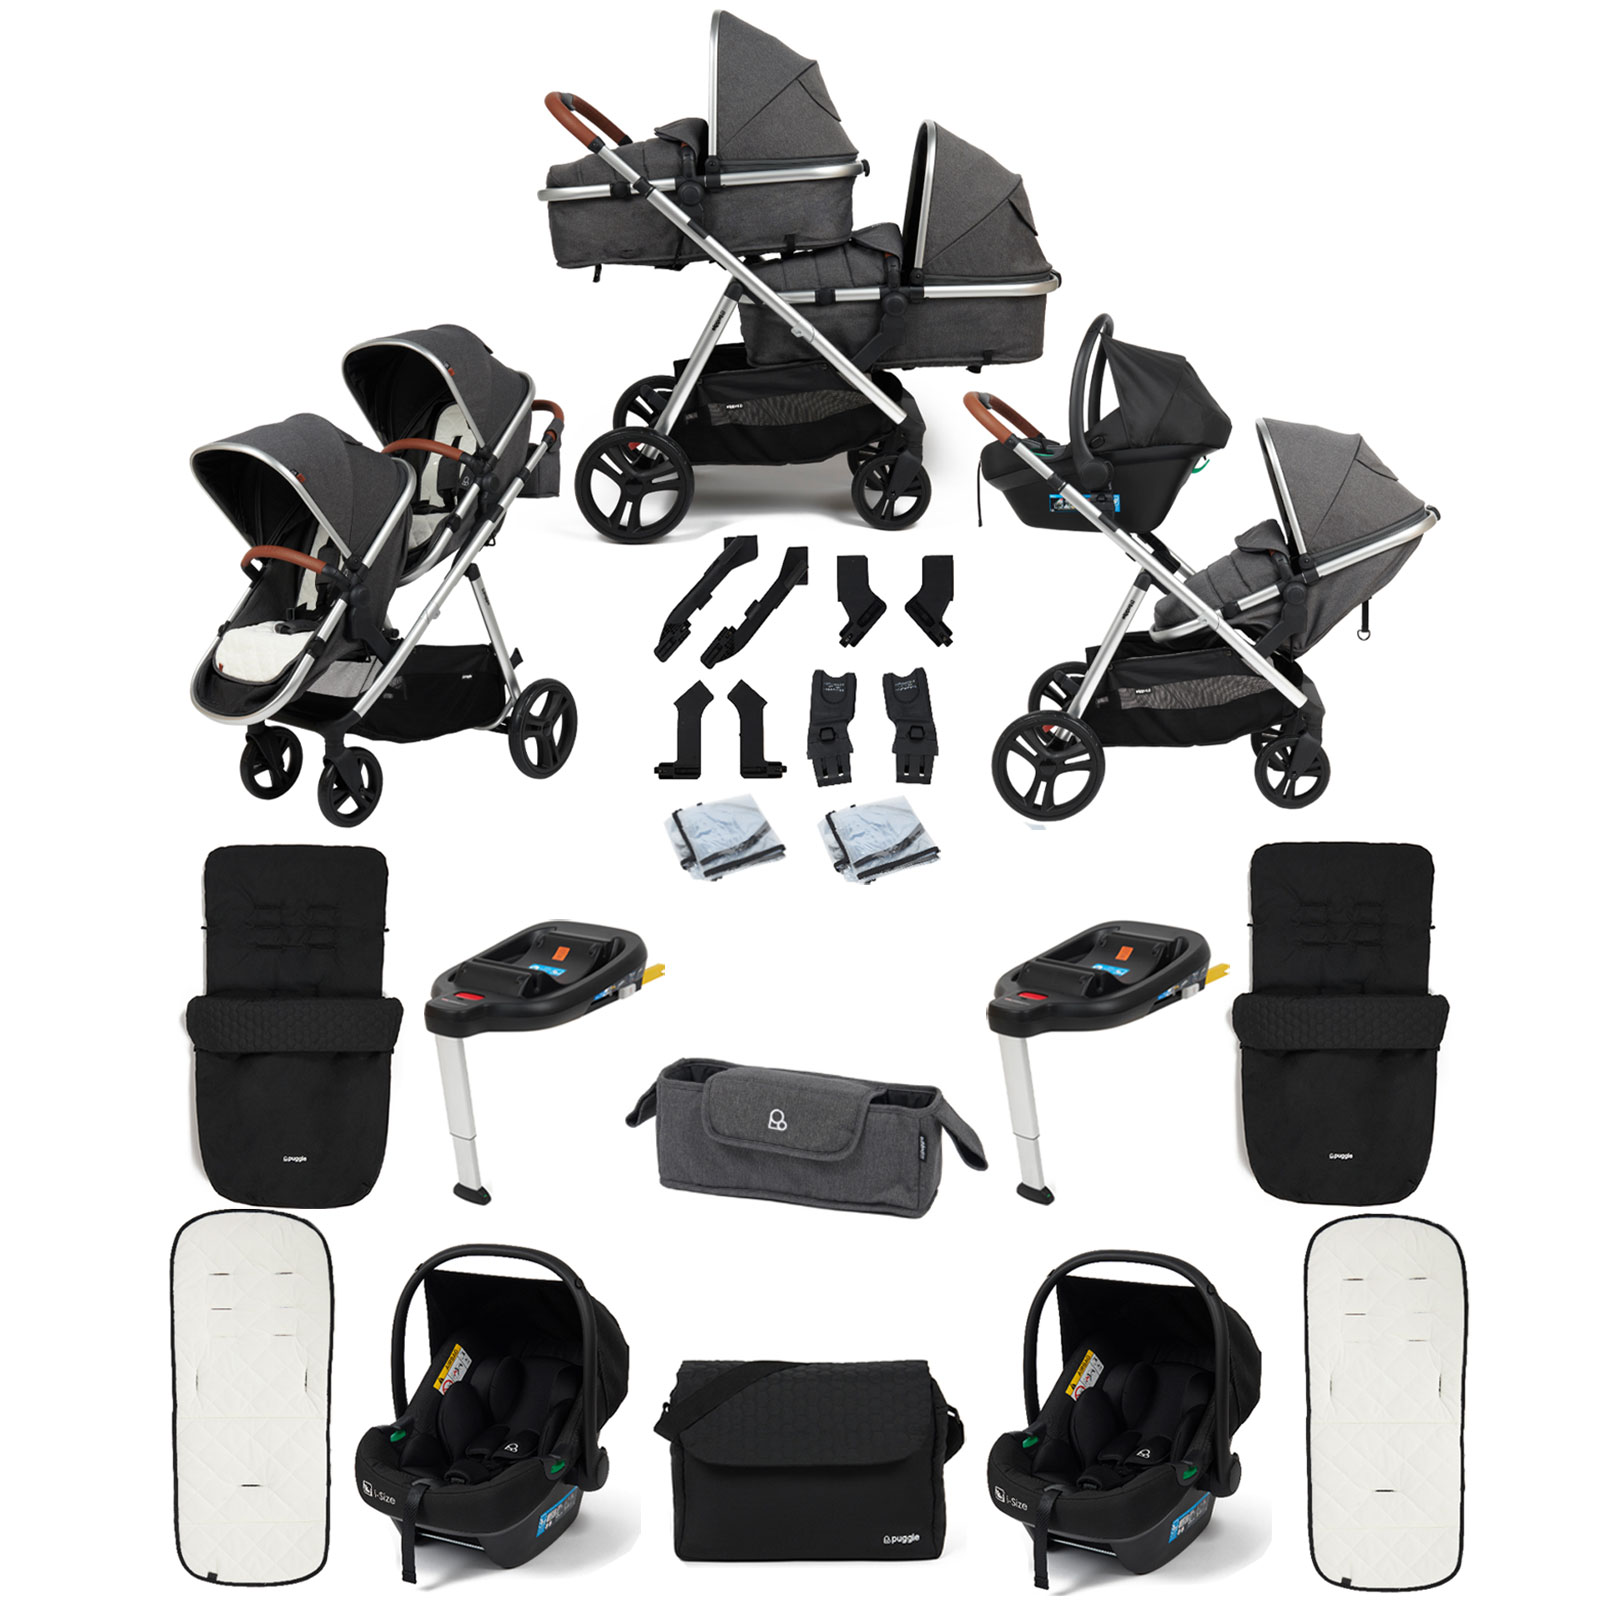 Puggle Memphis 2-in-1 Duo Double Travel System with 2 i-Size Car Seats, 2 ISOFIX Bases, 2 Footmuffs and Changing Bag - Platinum Grey